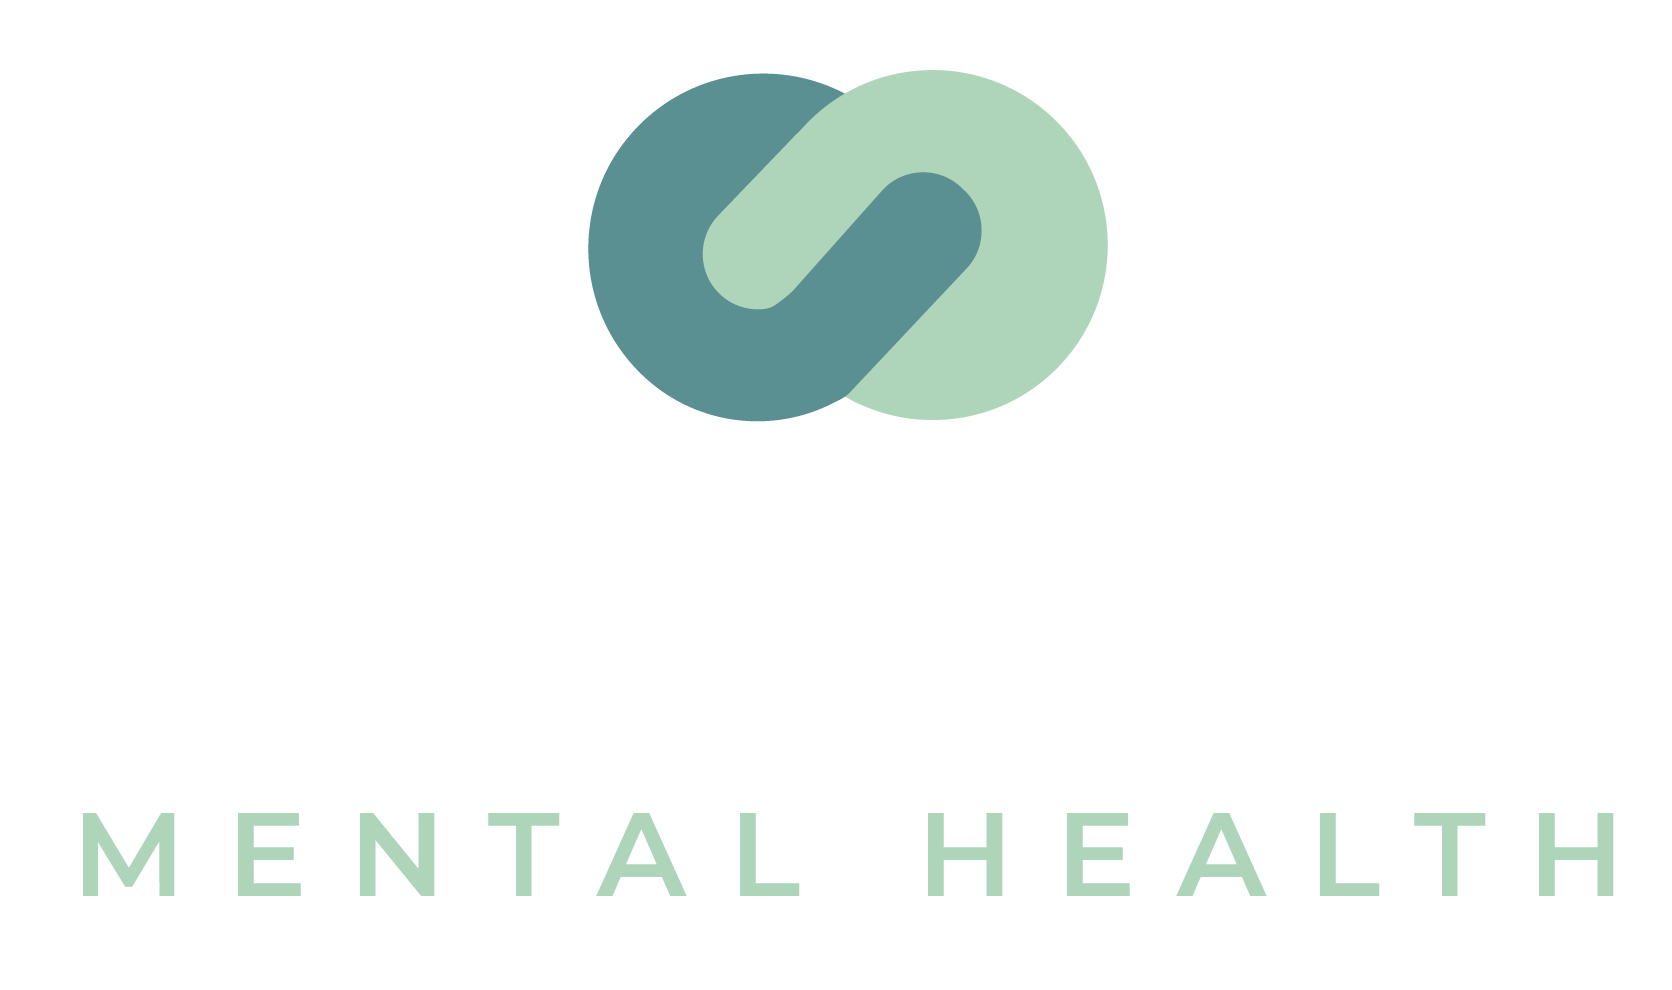 Connections Mental Health logo